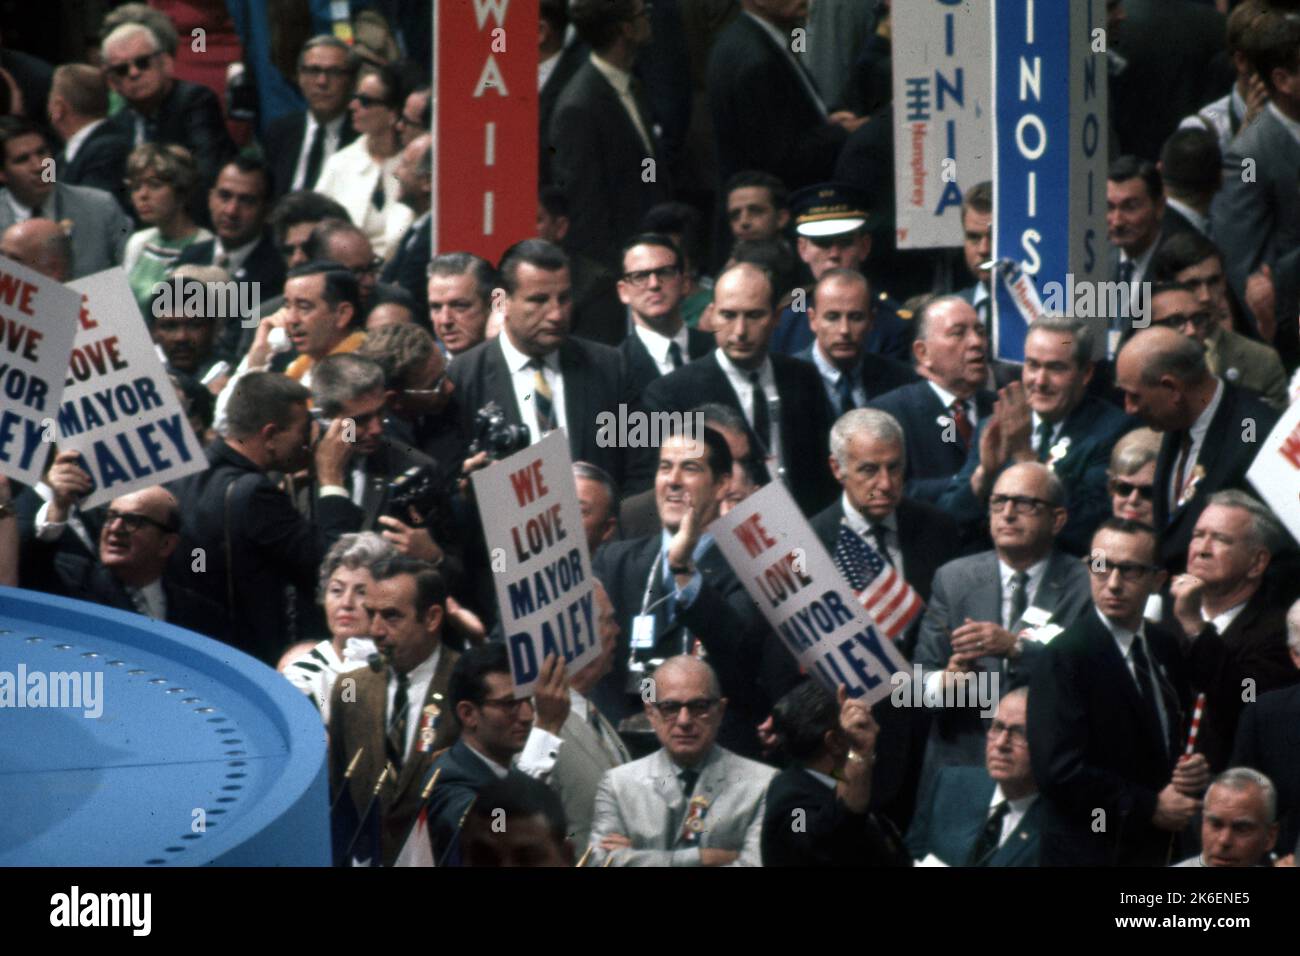 August 26, 1968, Chicago, Illinois: HUBERT H. HUMPHREY in a rally at the Chicago Democratic National Convention. (CREDIT IMAGE: © KEYSTONE Press Agency/ZUMA Press Wire).ew Stock Photo